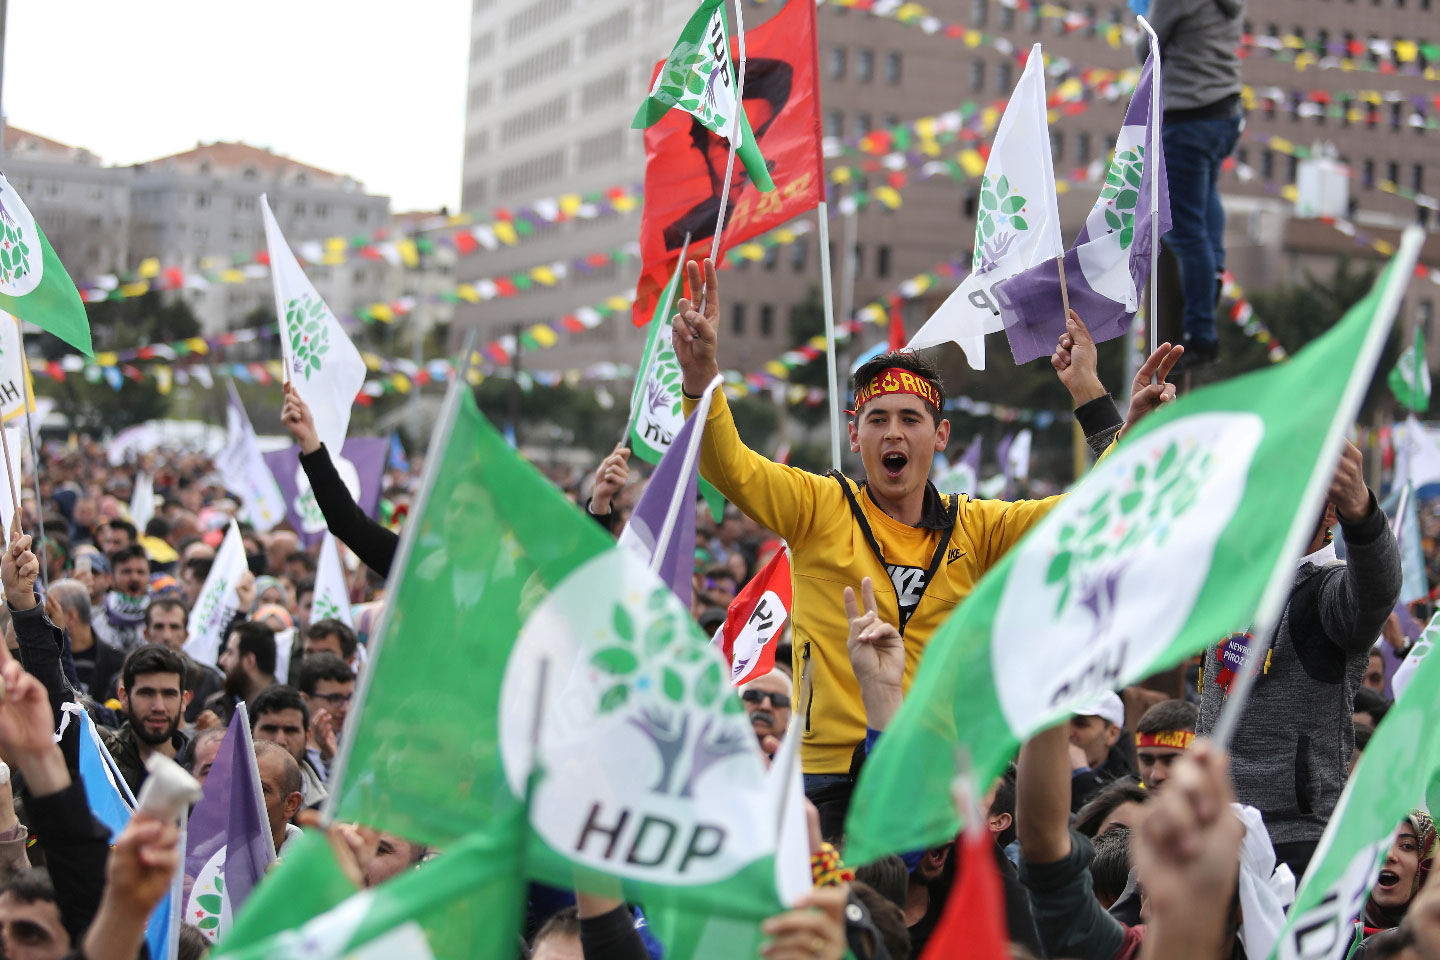 People wave pro-Kurdish Peoples' Democratic Party (HDP) flags during a gathering to celebrate Nowruz, which marks the arrival of spring and the new year, in Istanbul, Turkey March 24, 2019.